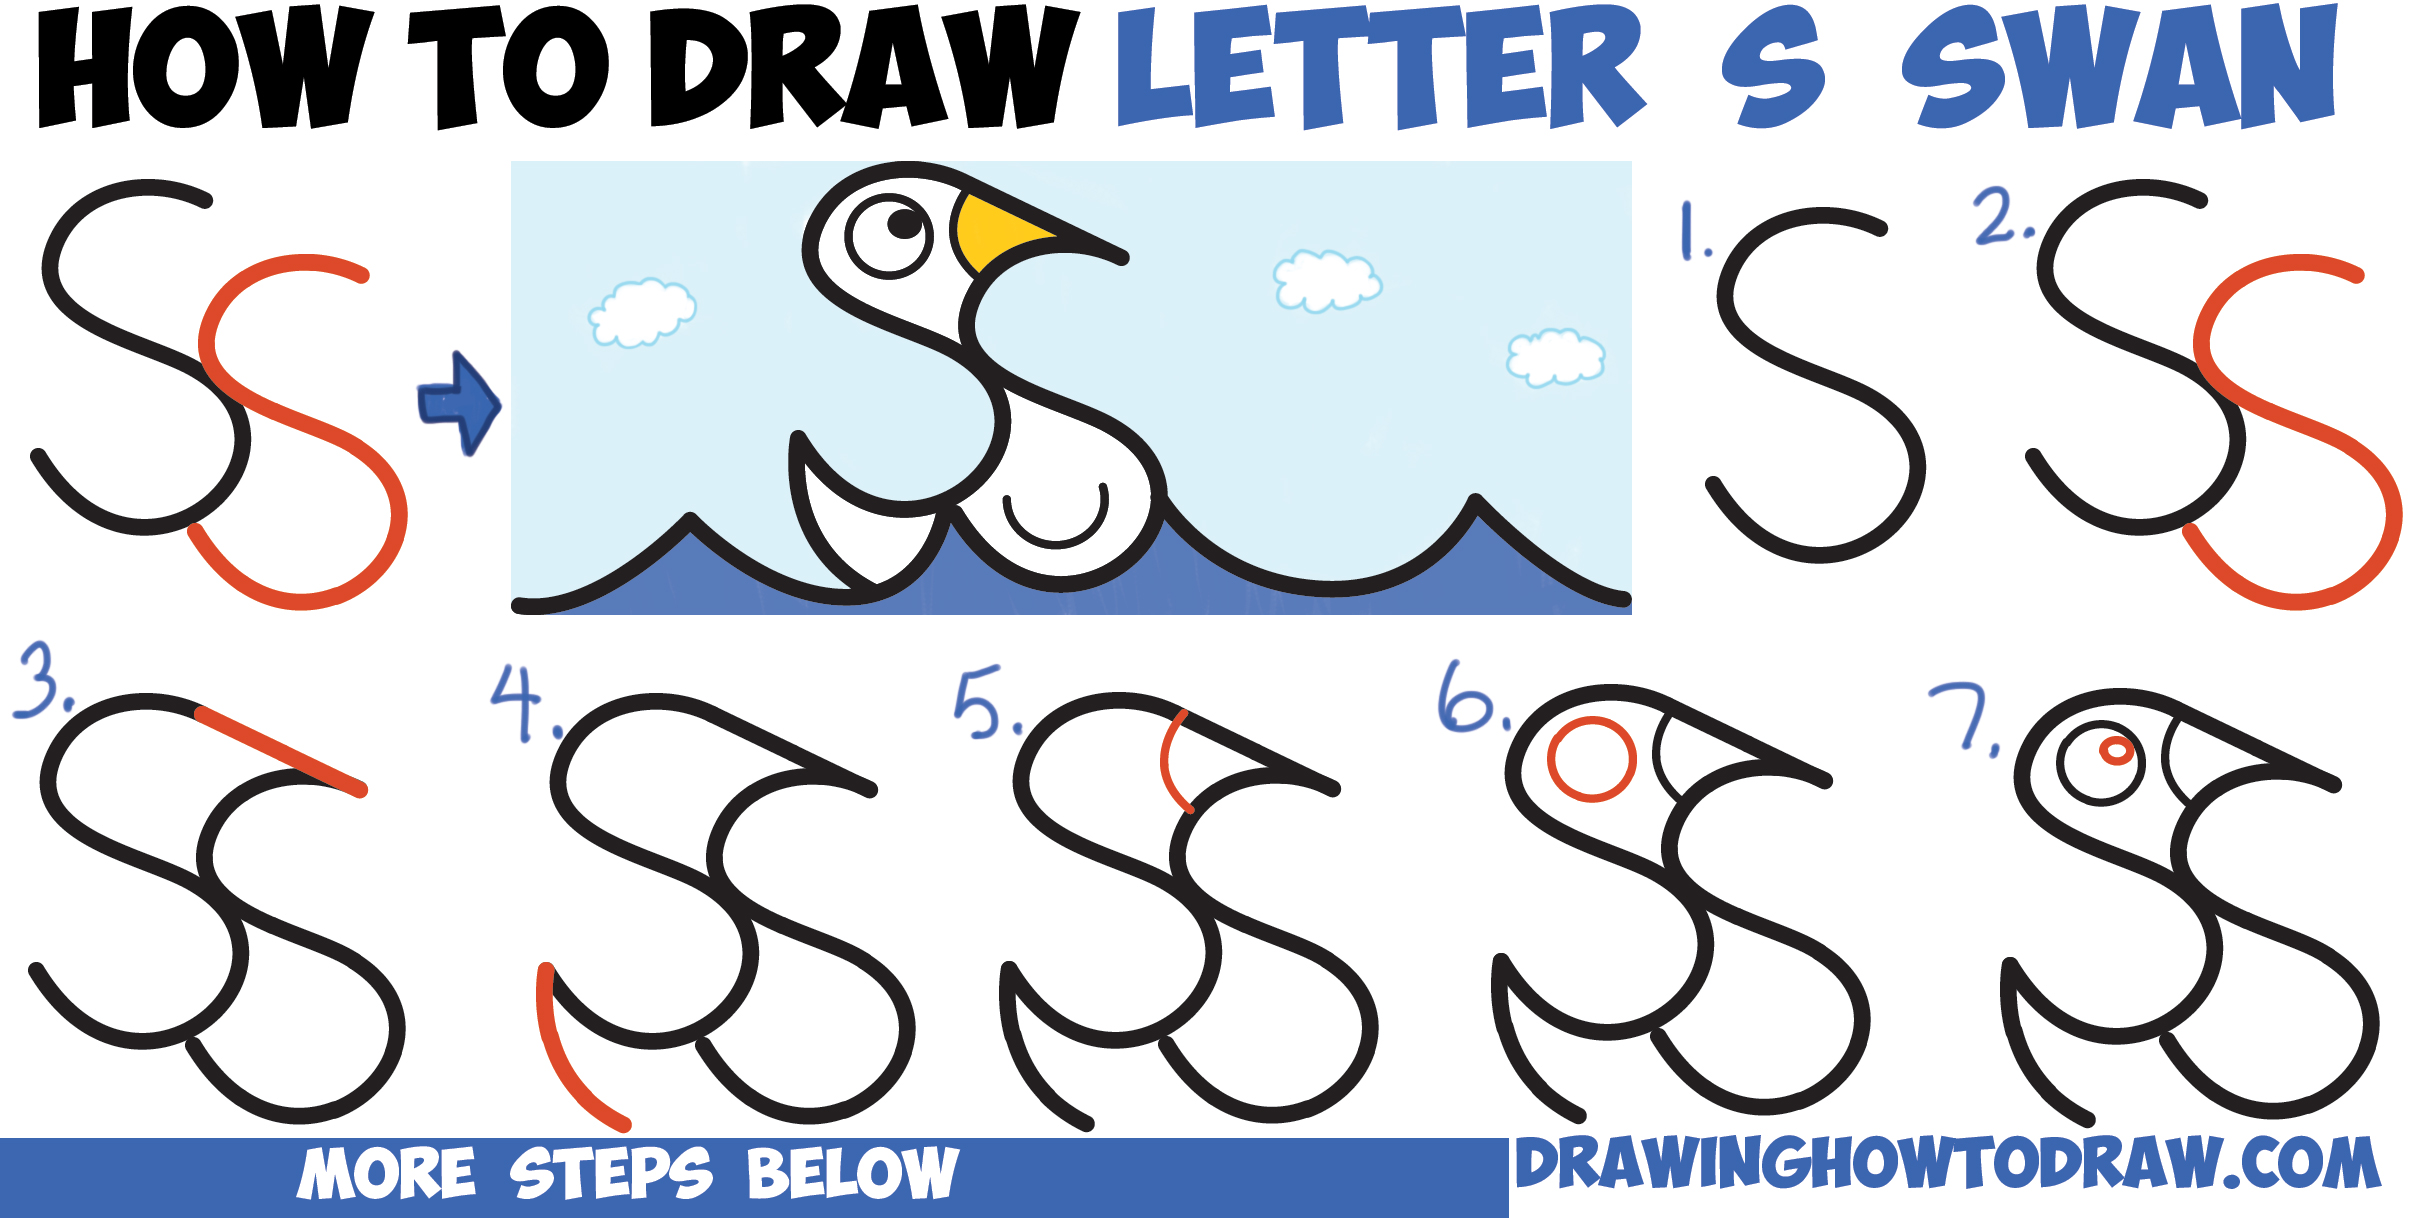 How to Draw Cartoon Goose Floating on Water from Letter S Shapes Easy Step by Step Drawing Tutorial for Kids